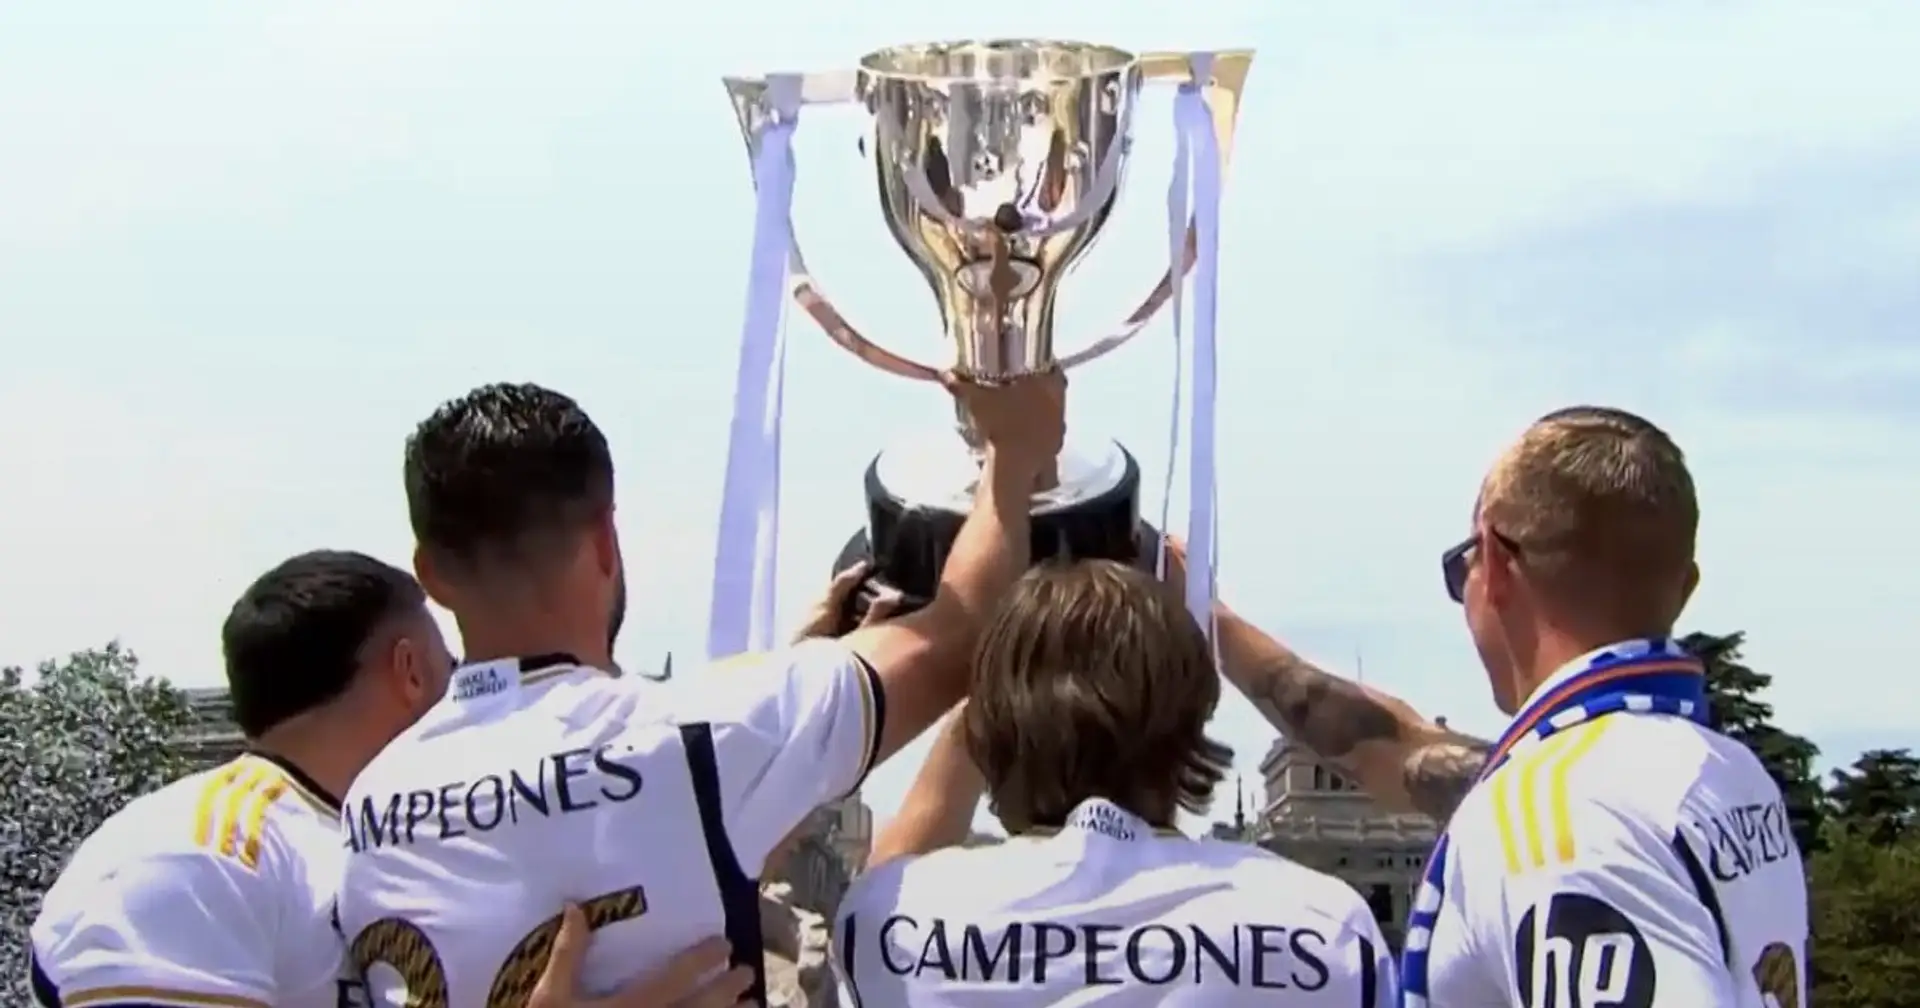 The Goddess of Cibeles wears new look & 4 other things spotted as Real Madrid celebrate La Liga crown 